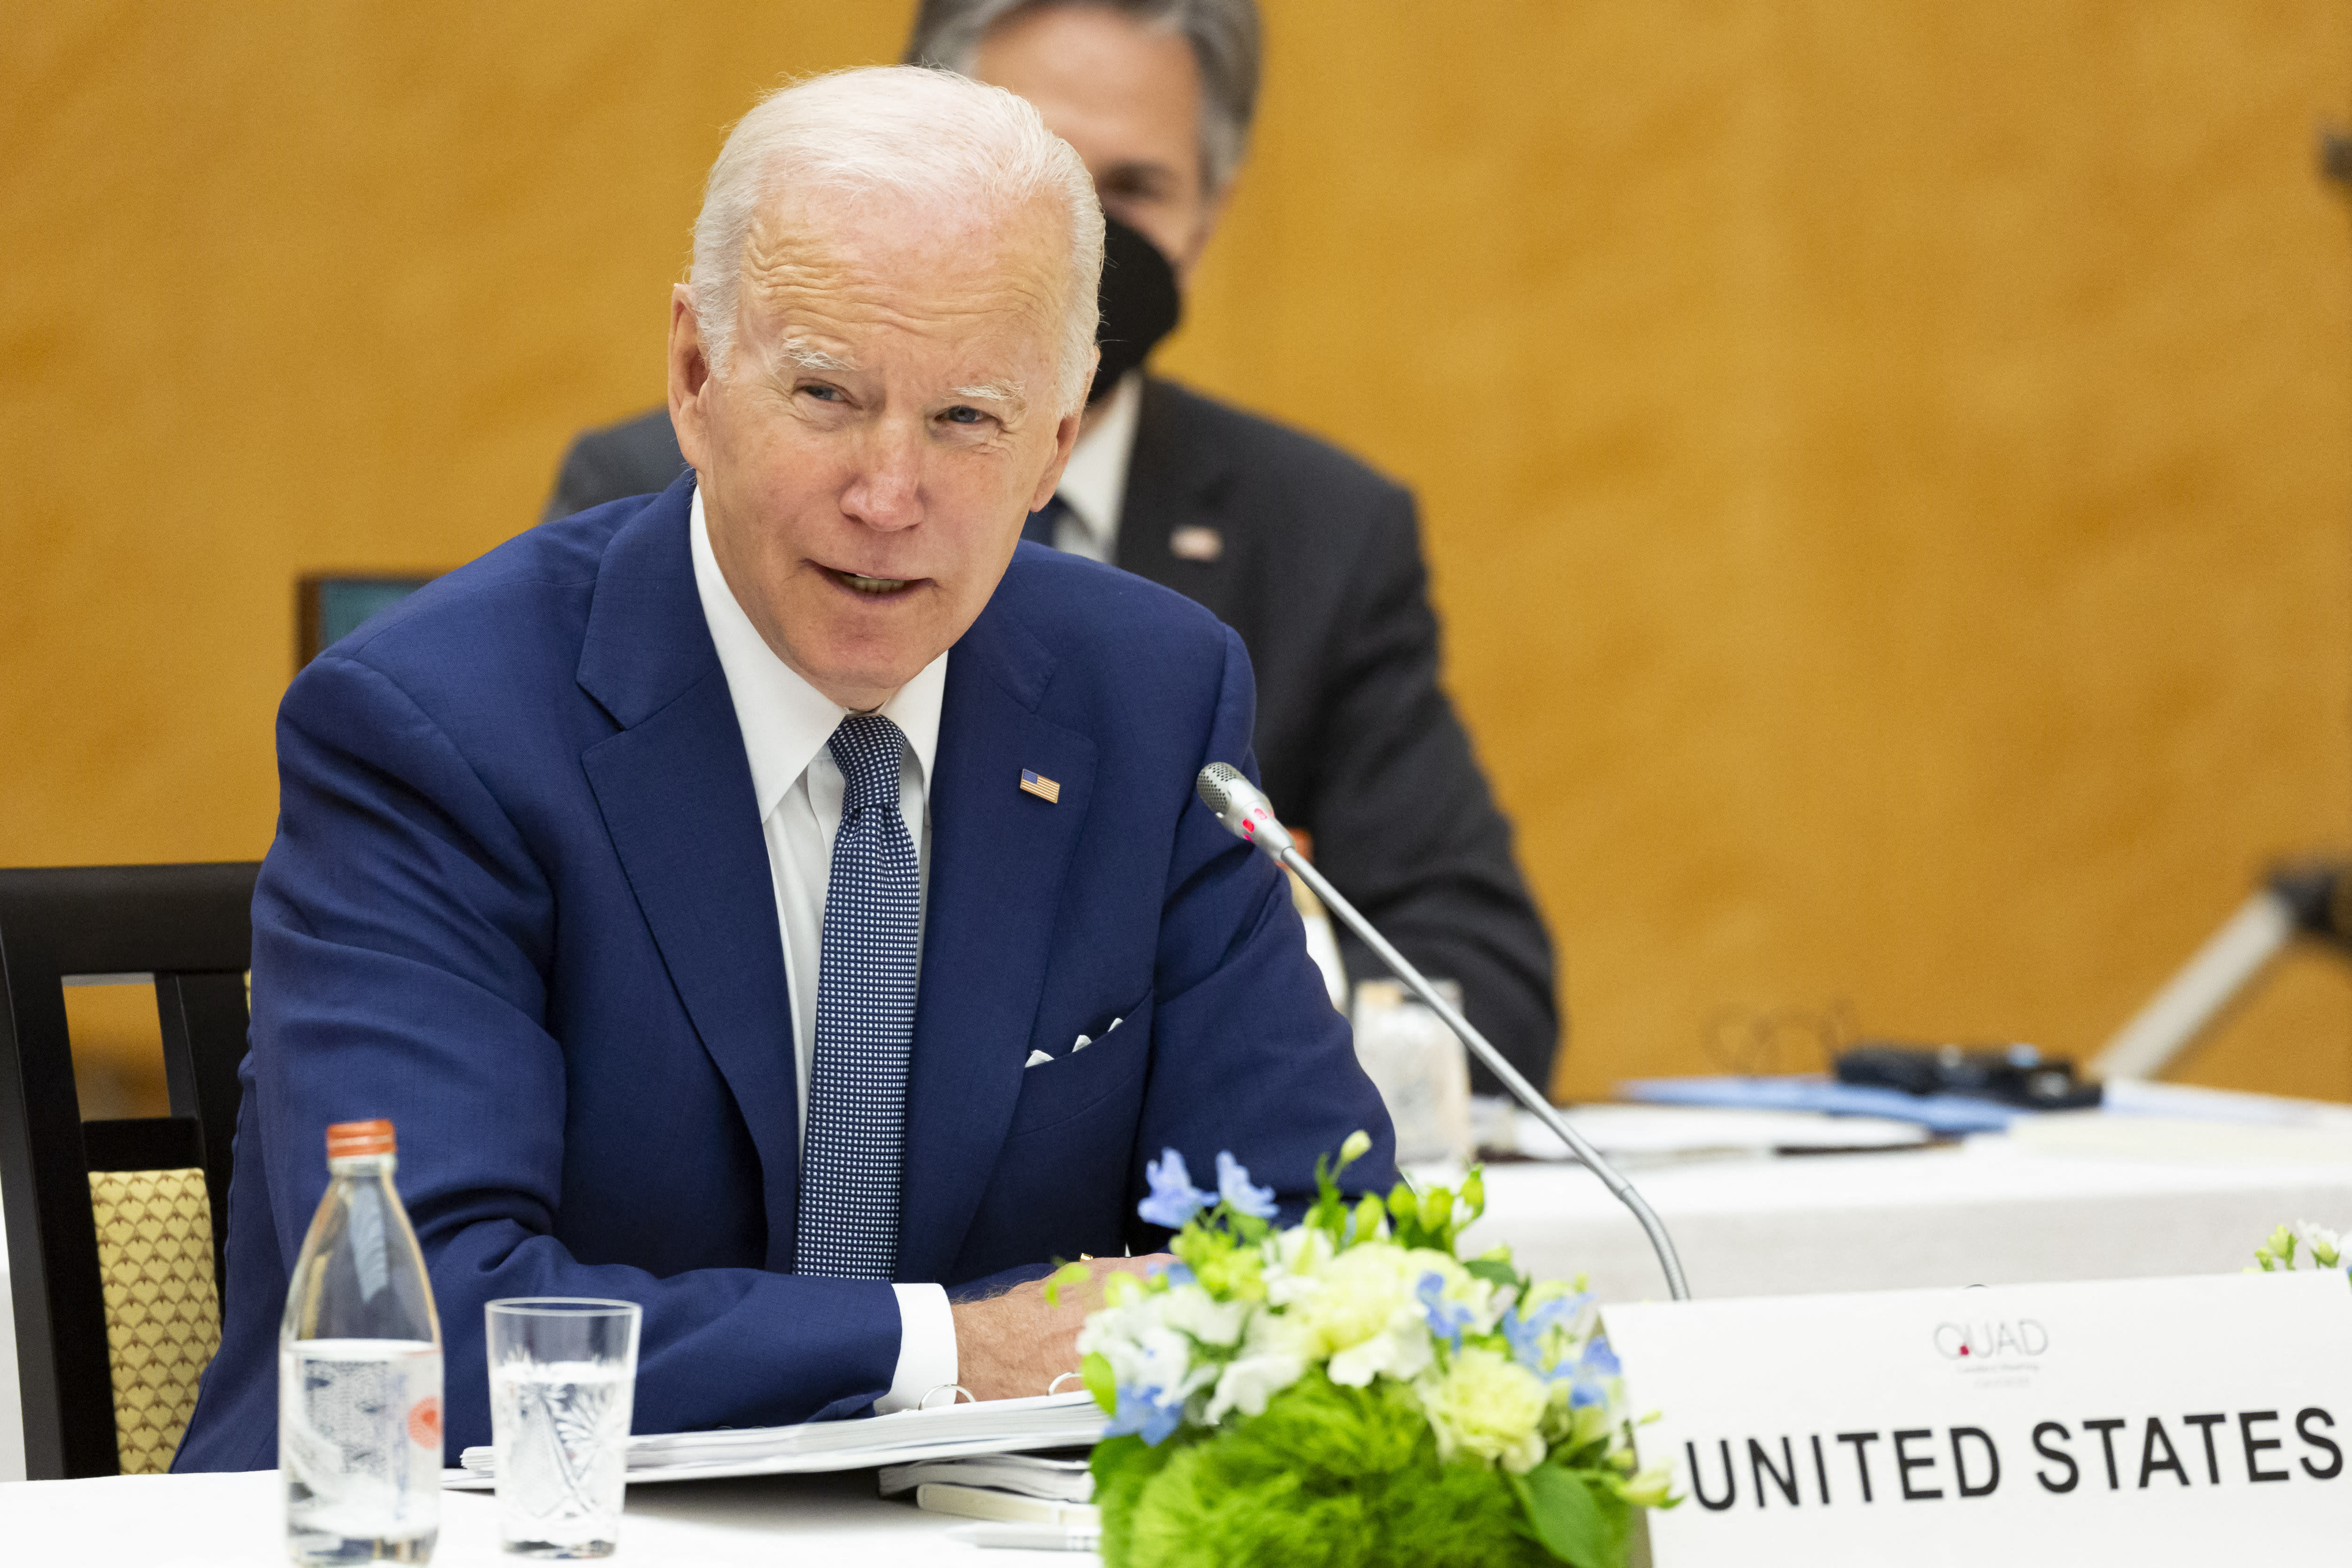 Analysis: Biden's Taiwan remarks show conviction to defend island but carry risks